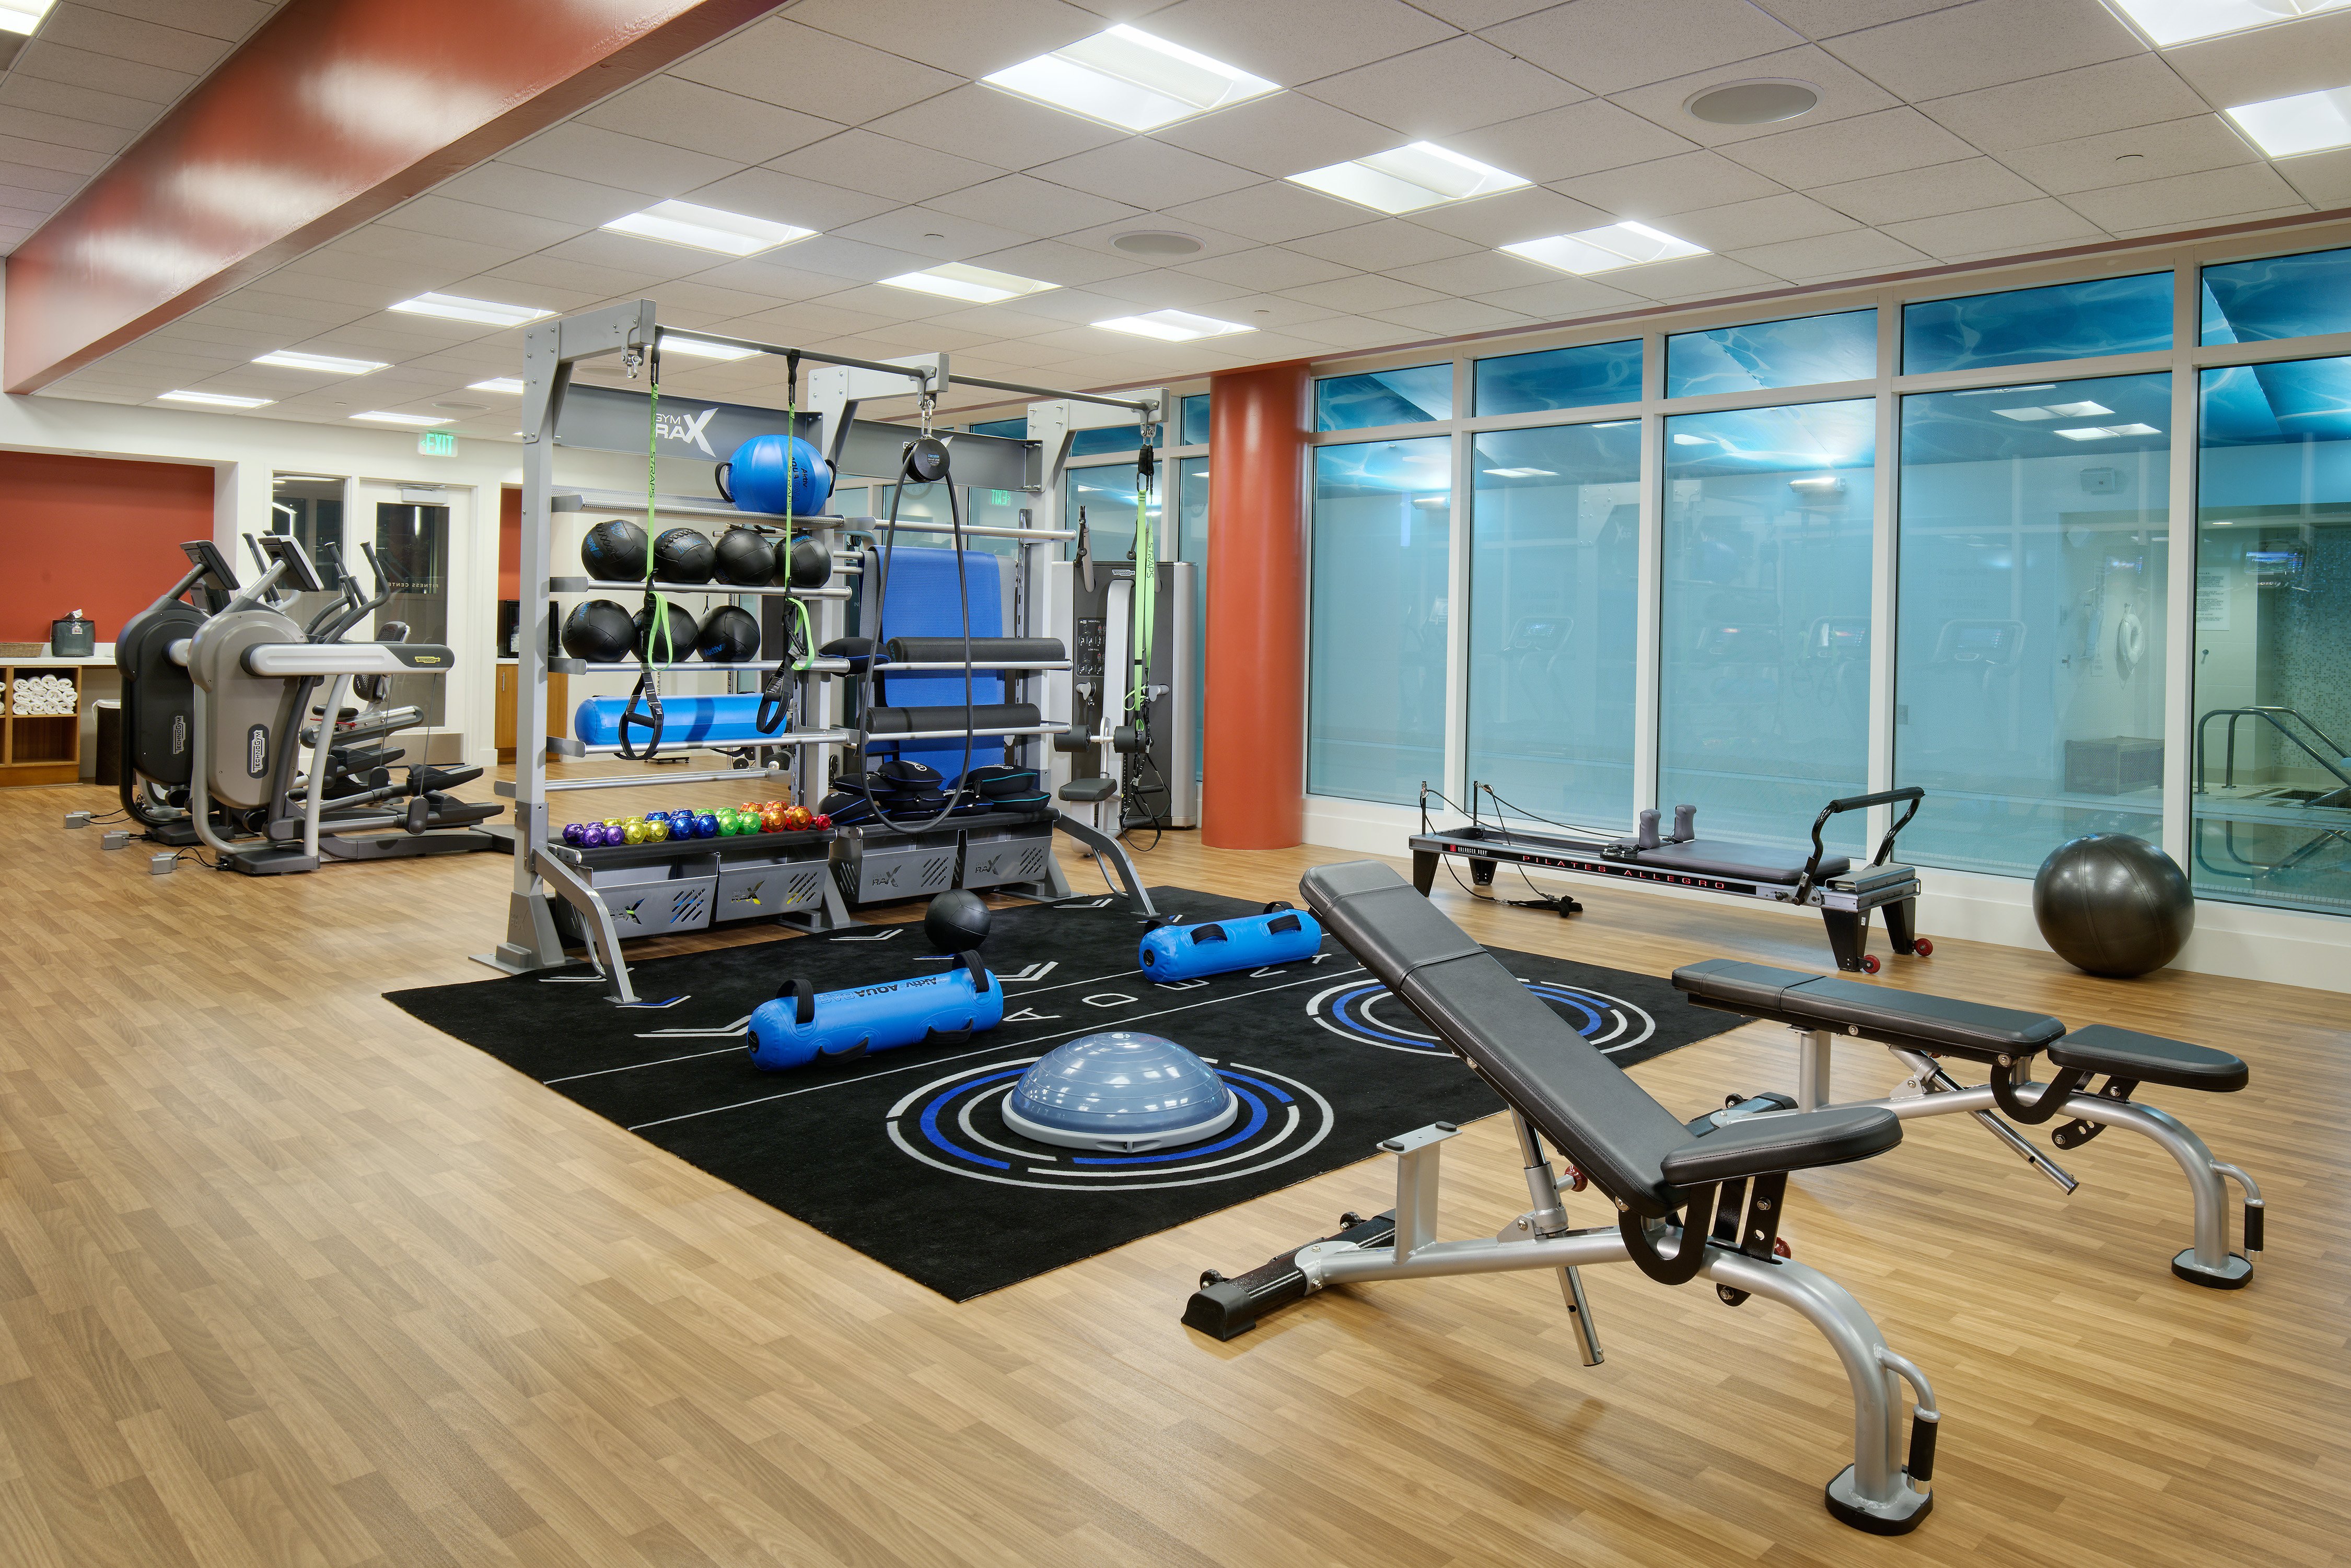 Fitness Center has everything you need for a great workout